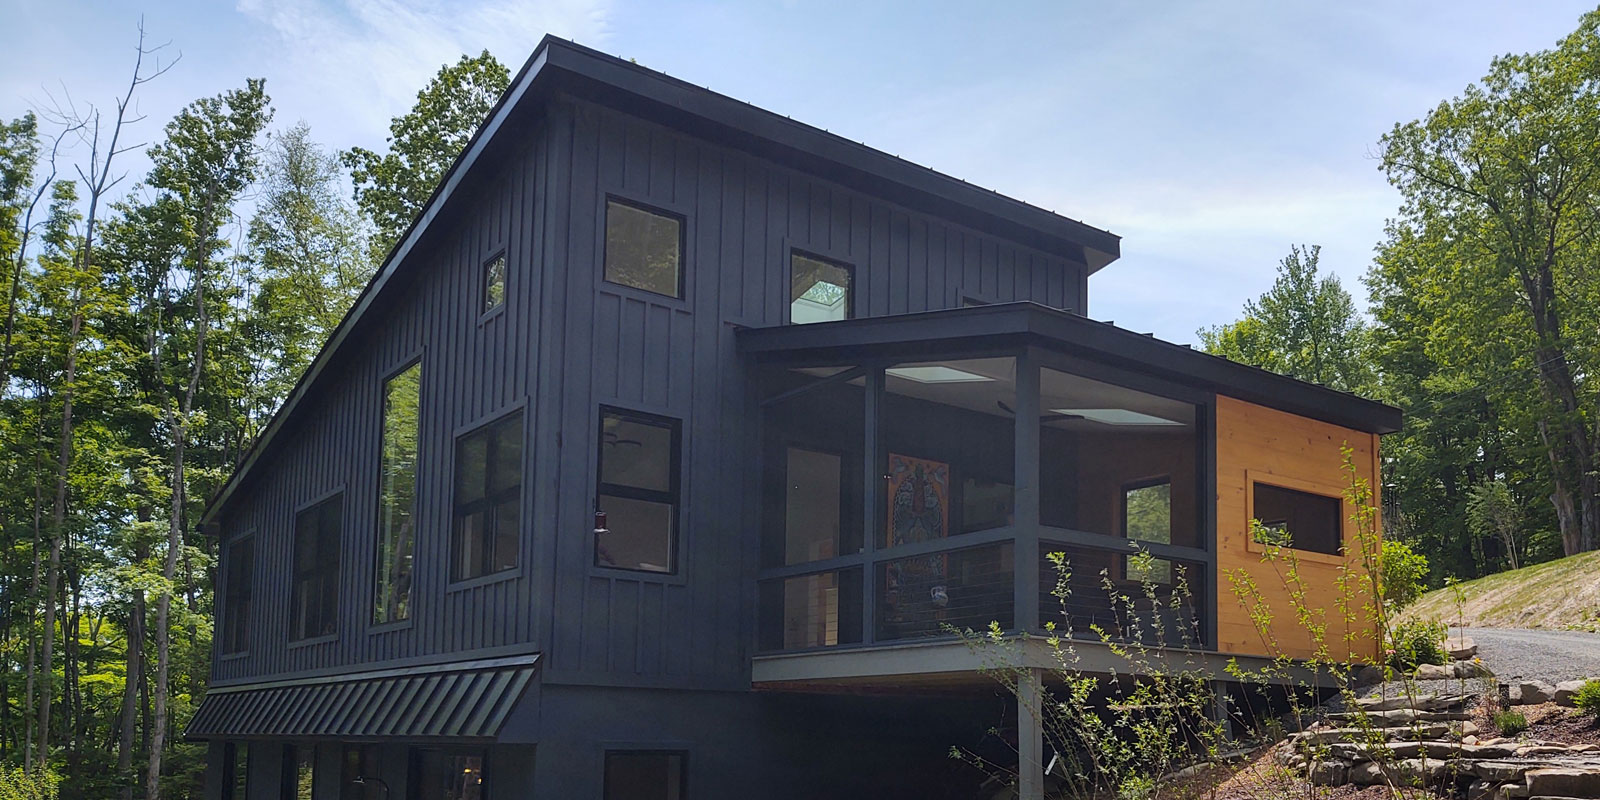 Modern house made with wood and shipping container materials